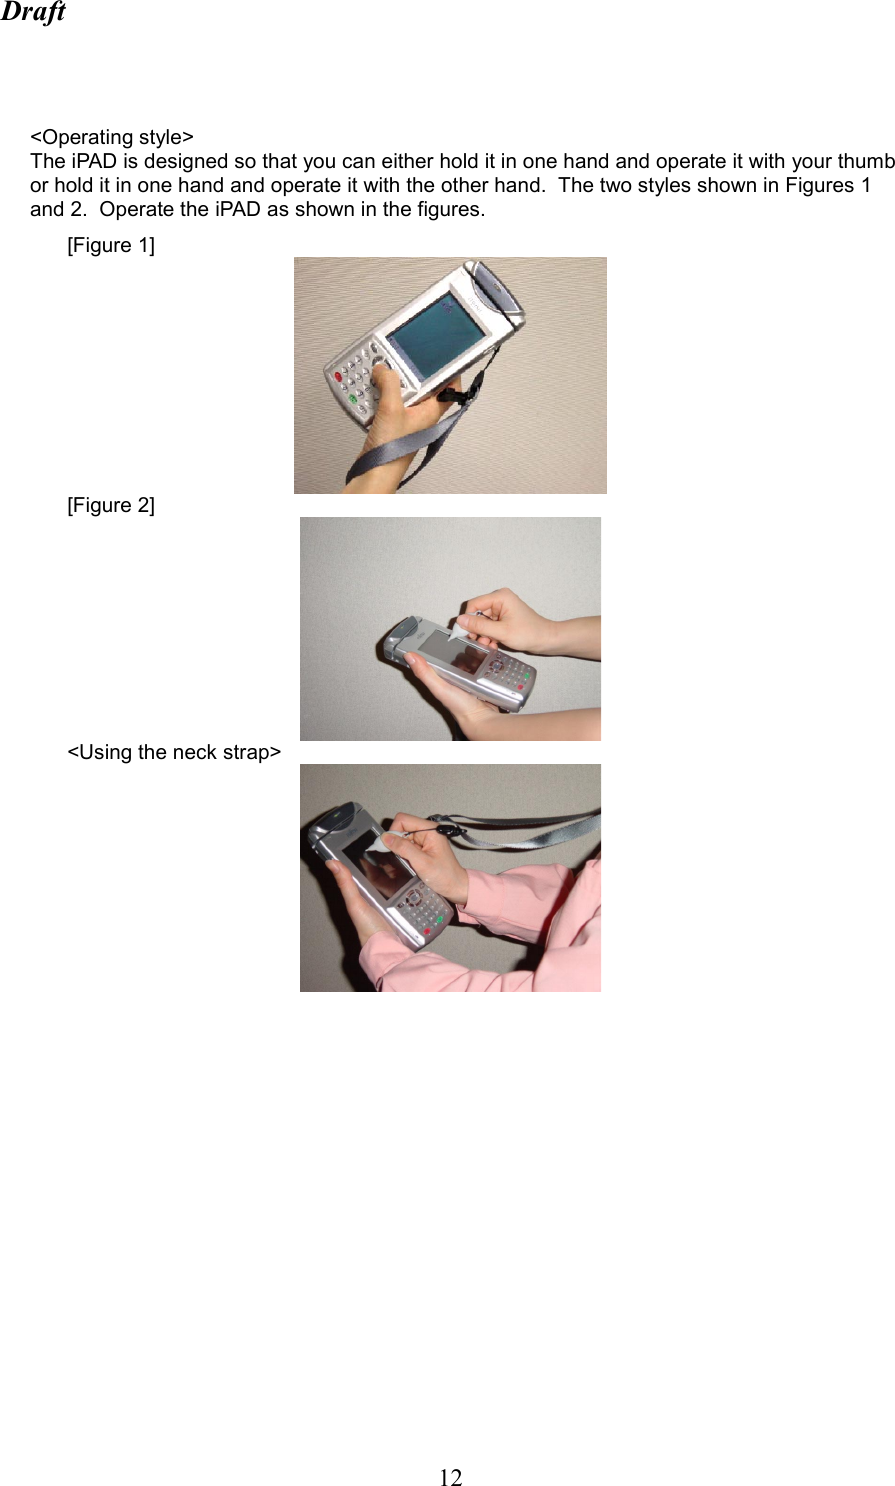 Draft  12   &lt;Operating style&gt; The iPAD is designed so that you can either hold it in one hand and operate it with your thumb or hold it in one hand and operate it with the other hand.  The two styles shown in Figures 1 and 2.  Operate the iPAD as shown in the figures. [Figure 1]  [Figure 2]  &lt;Using the neck strap&gt; 